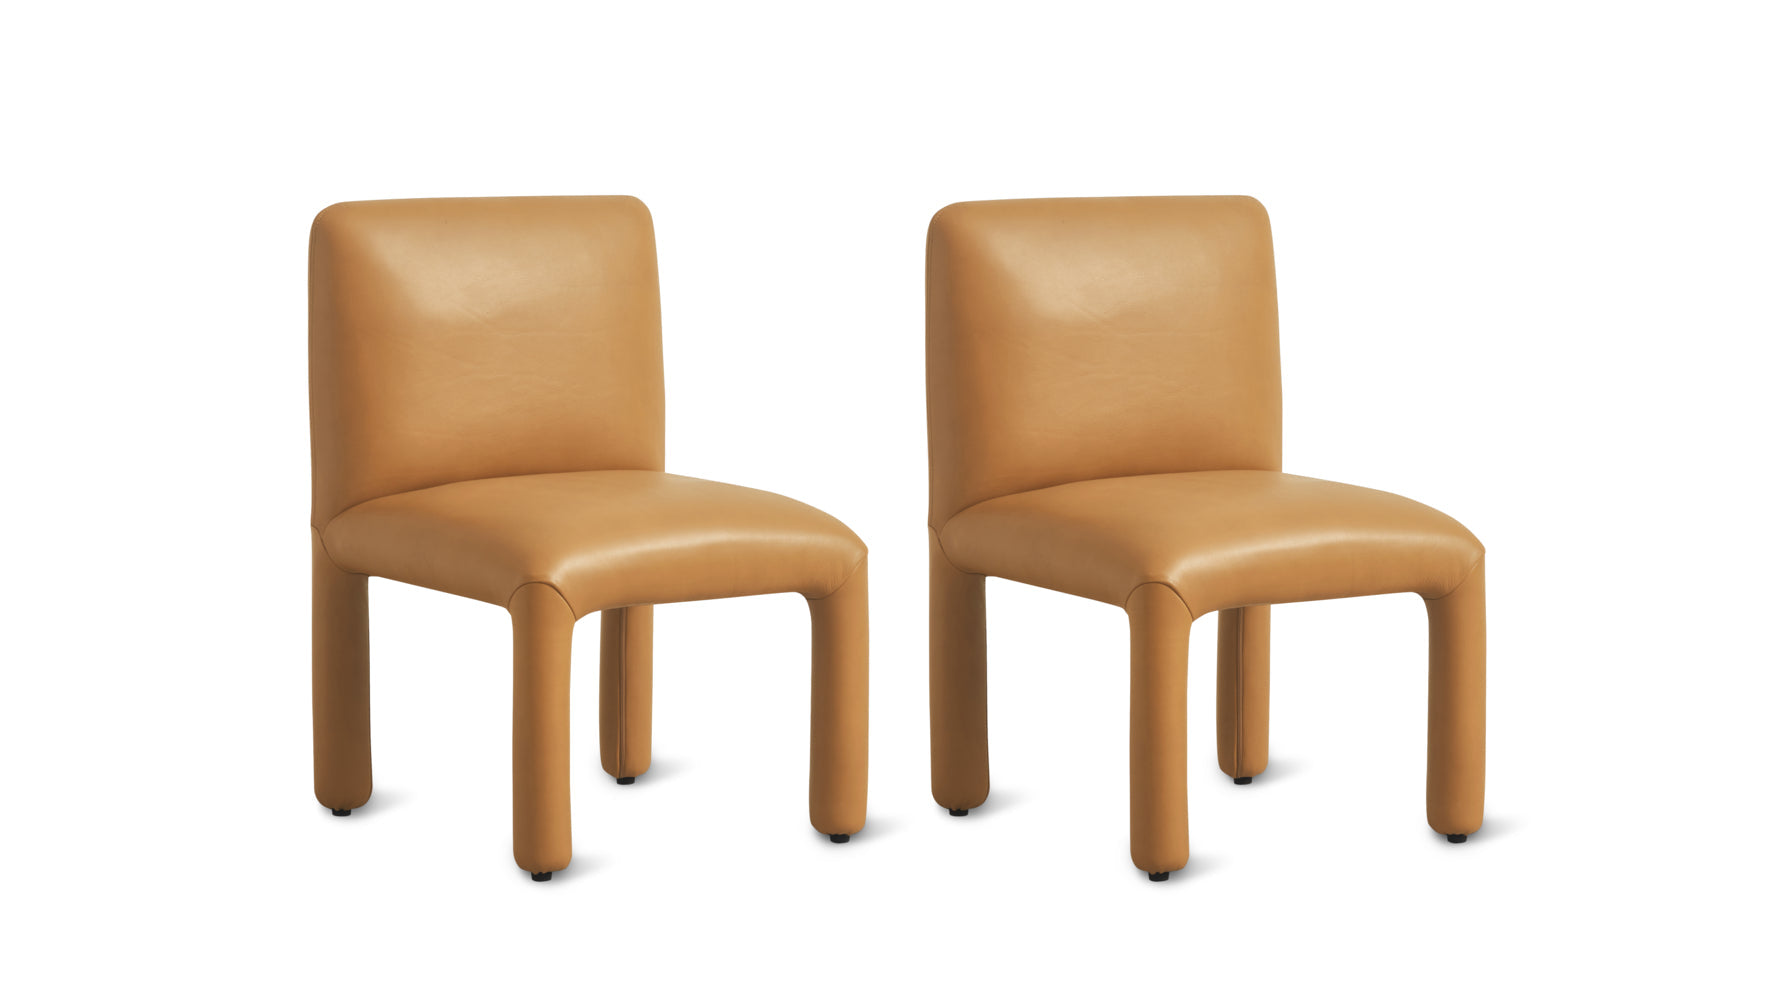 Another Round Dining Chair (Set Of Two), Camel - Image 2